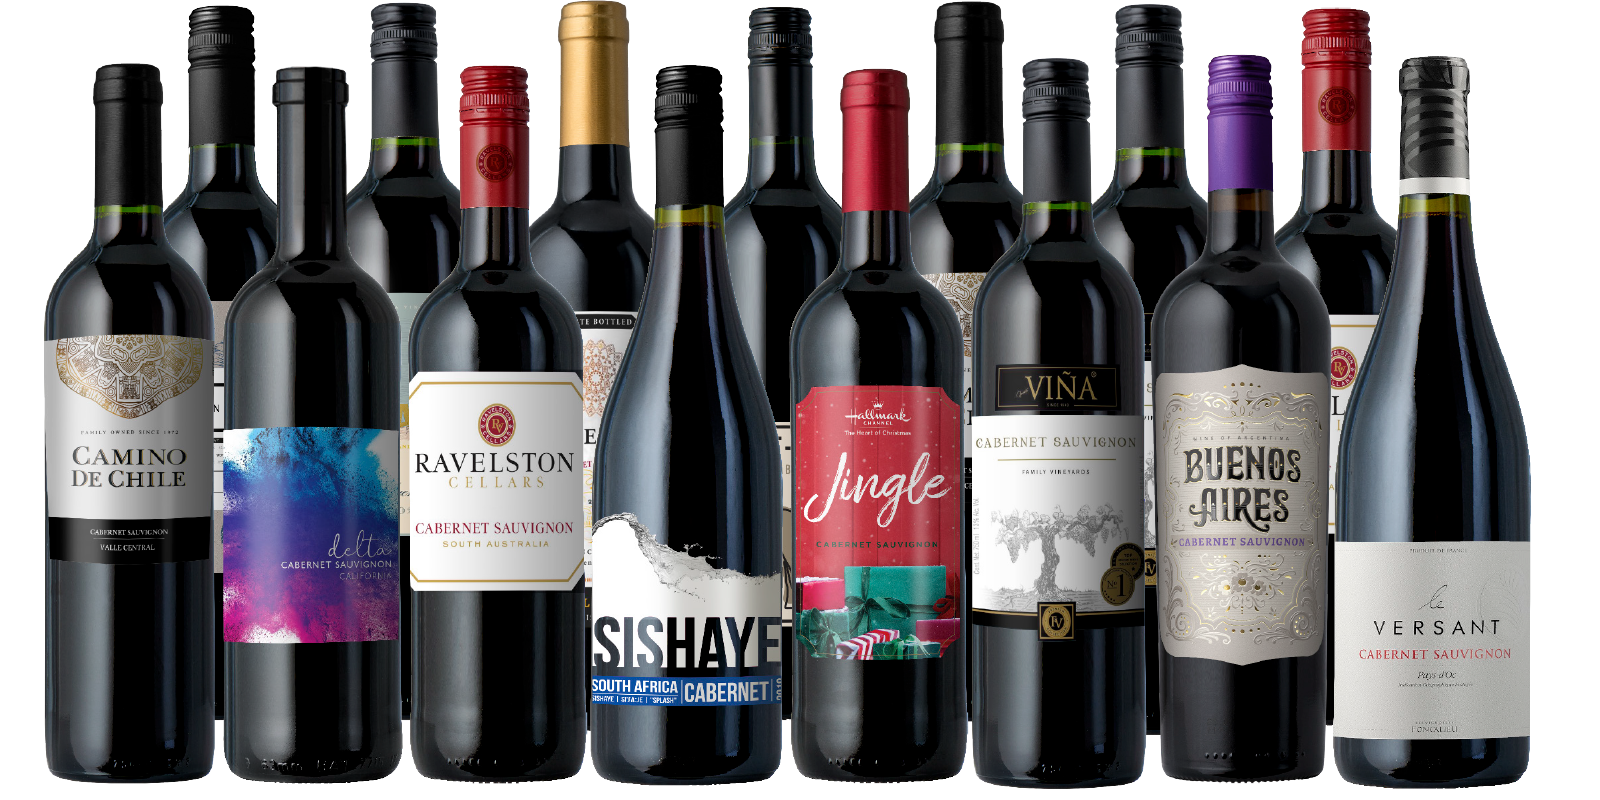 Craving Cabernets 15-Pack!